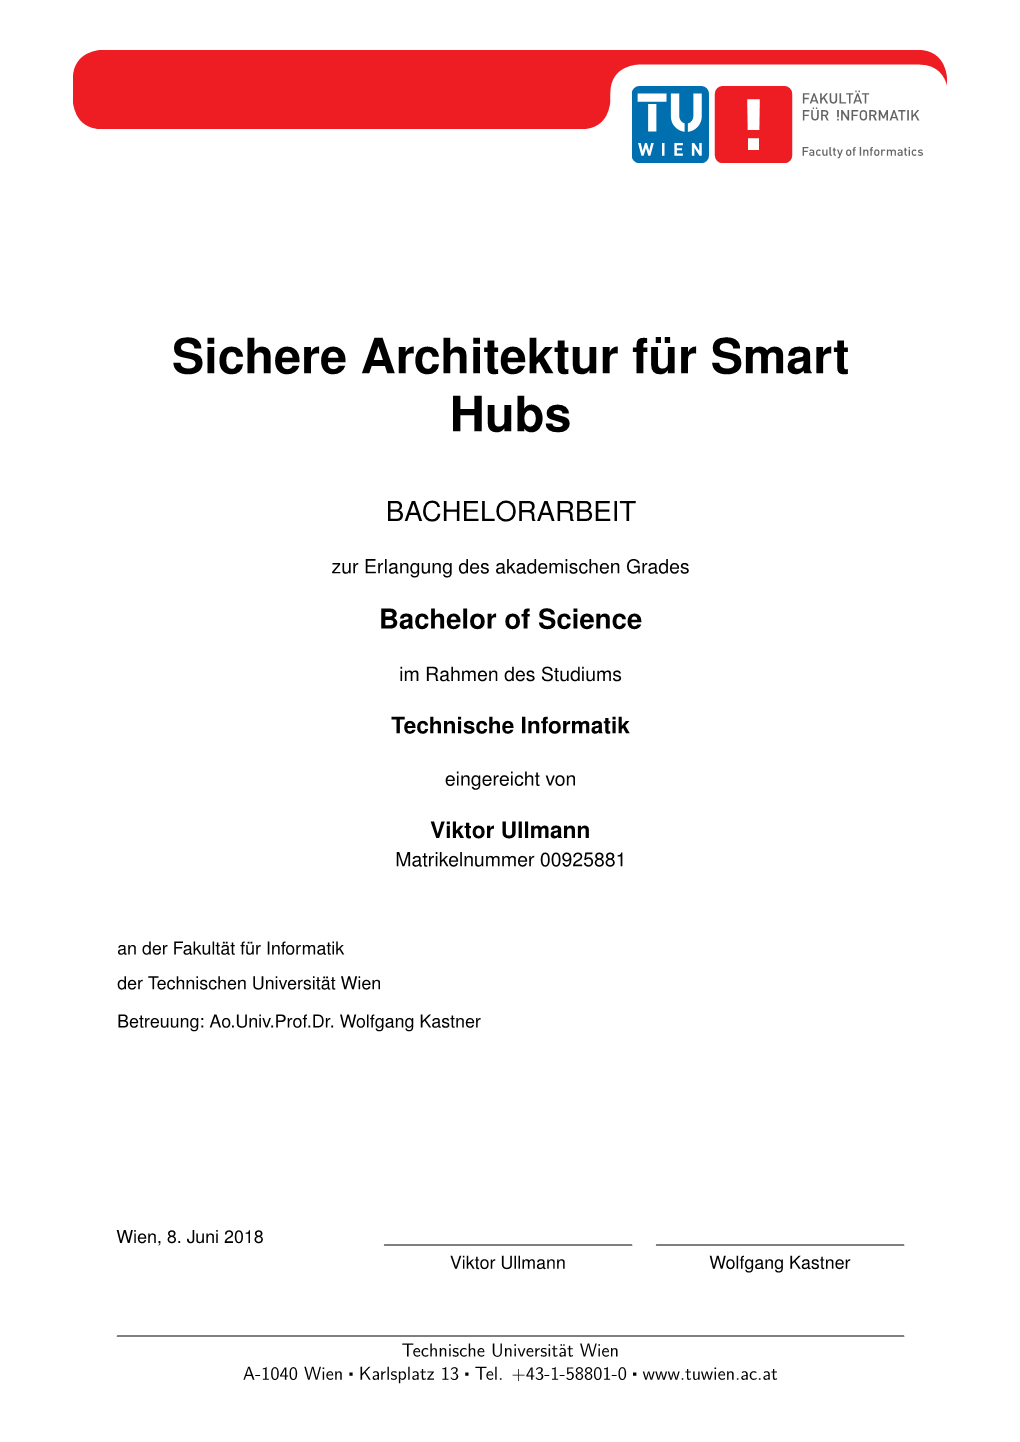 Security Architecture for Smart Hubs